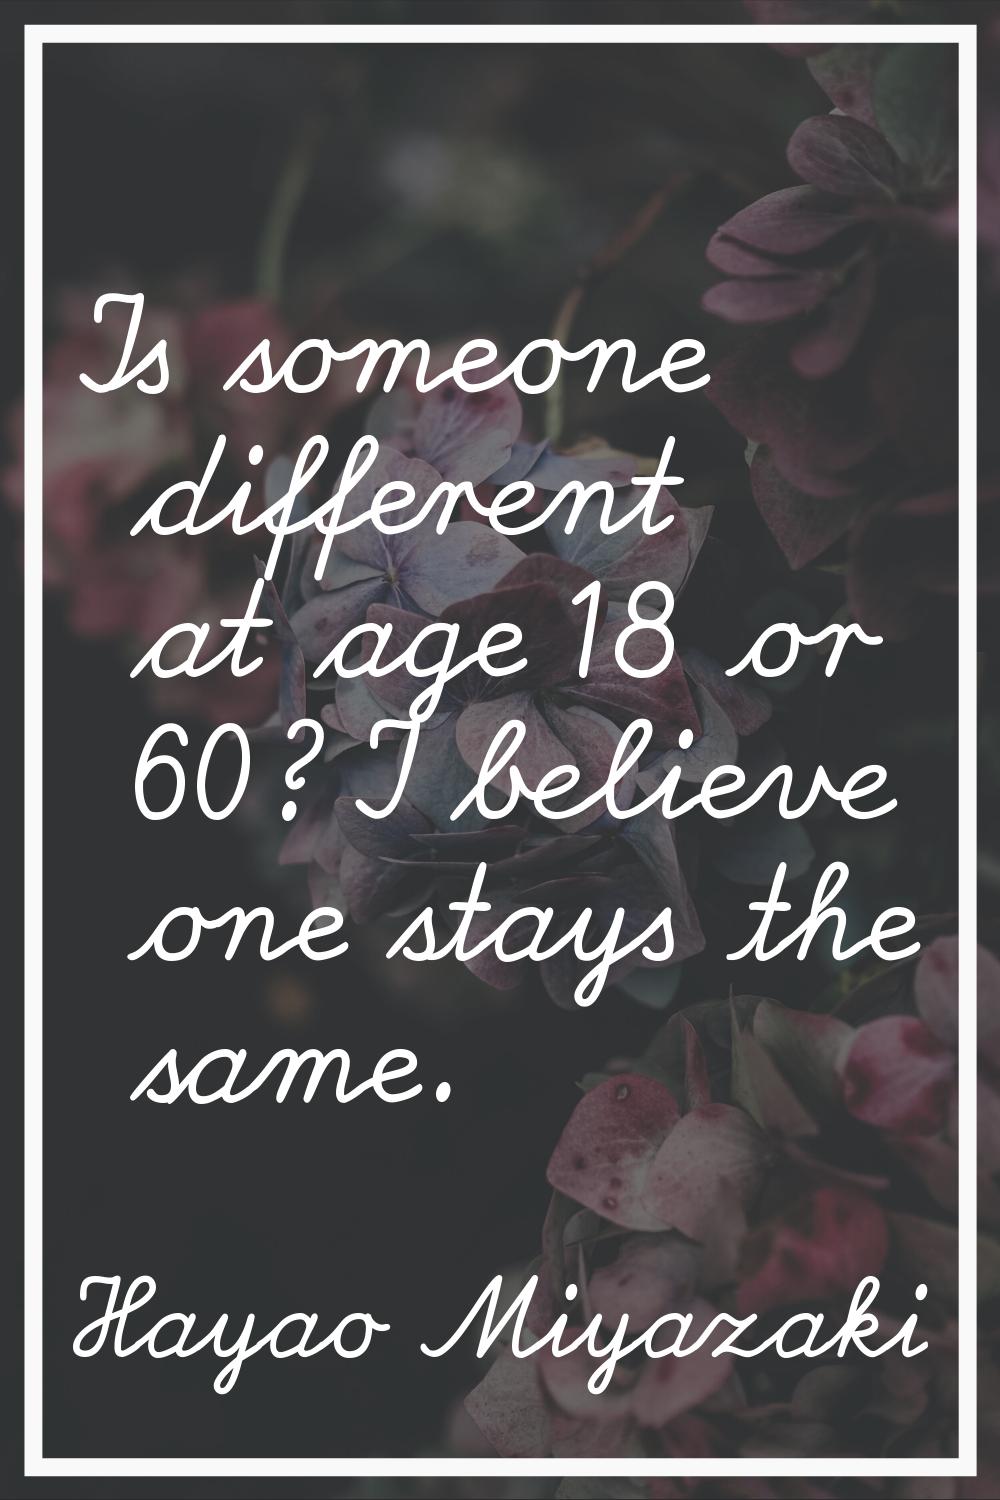 Is someone different at age 18 or 60? I believe one stays the same.